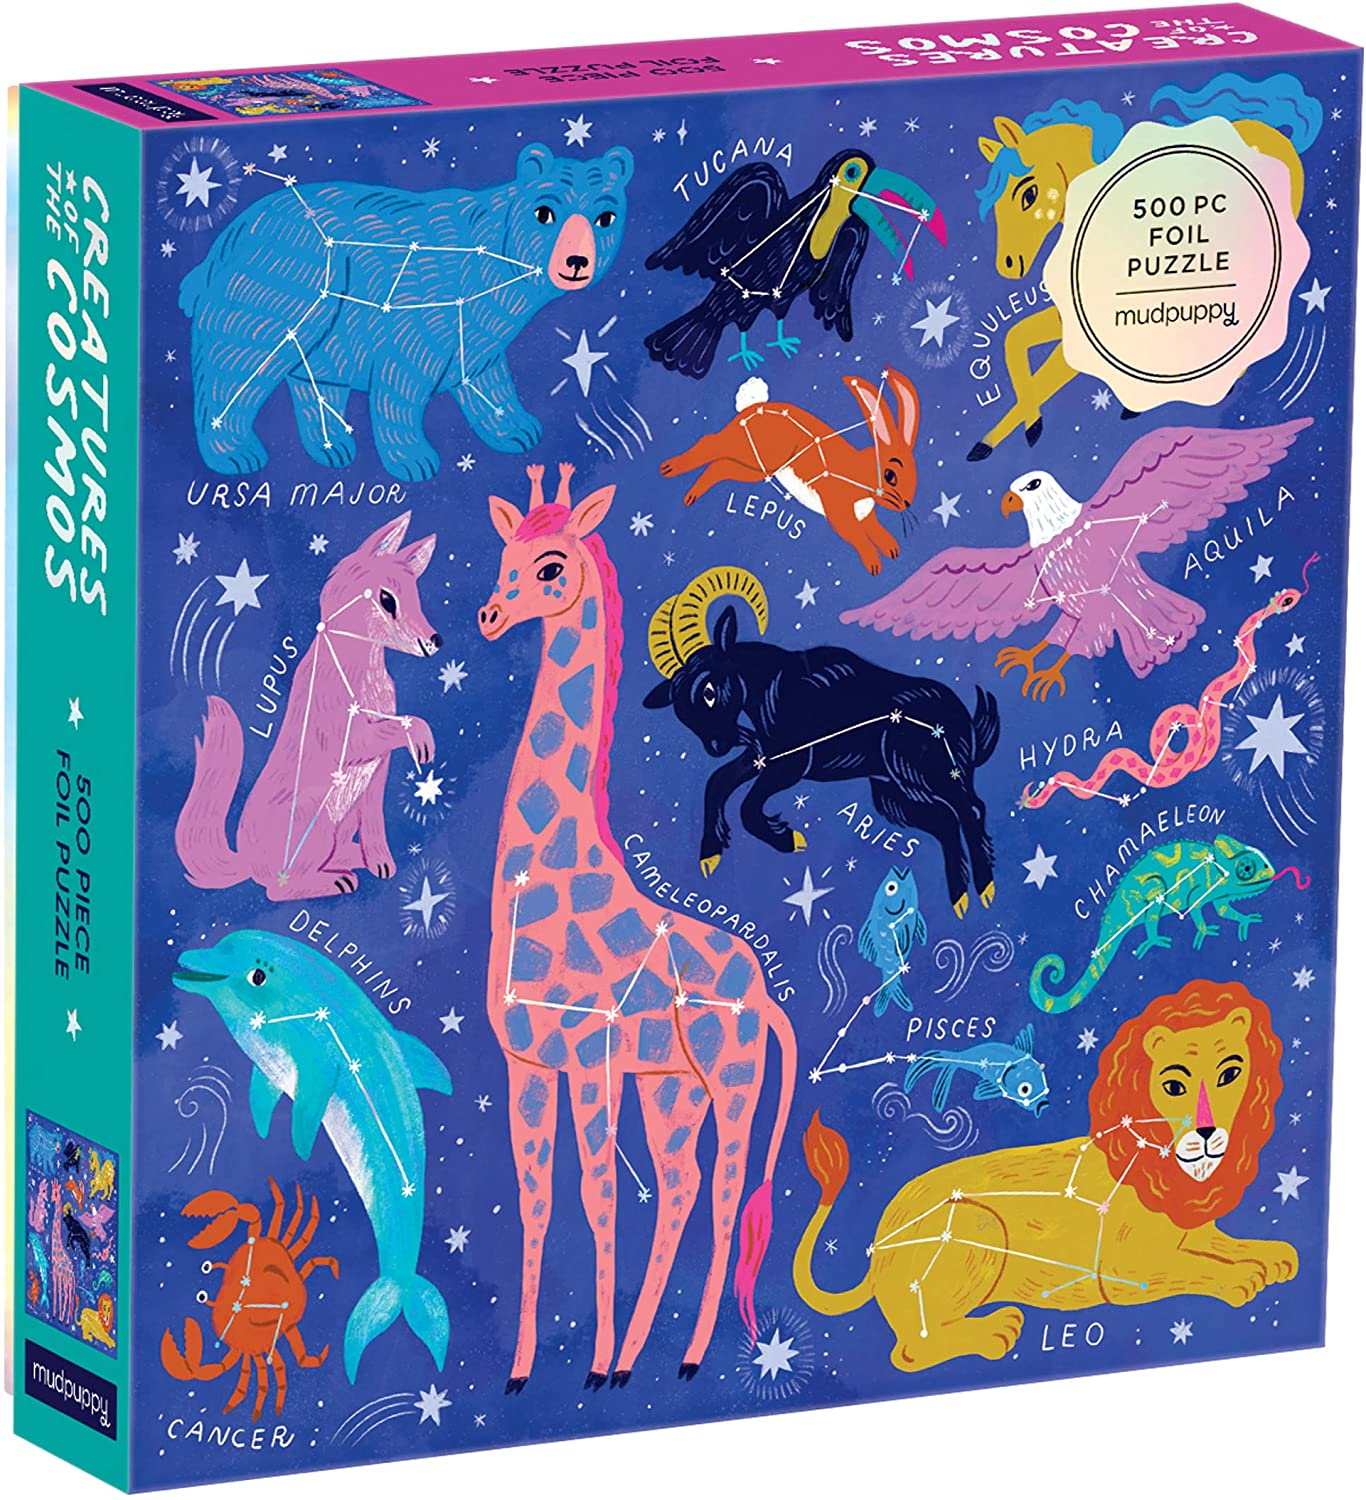 Creatures of the Cosmos Foil Puzzle - Scratch and Dent